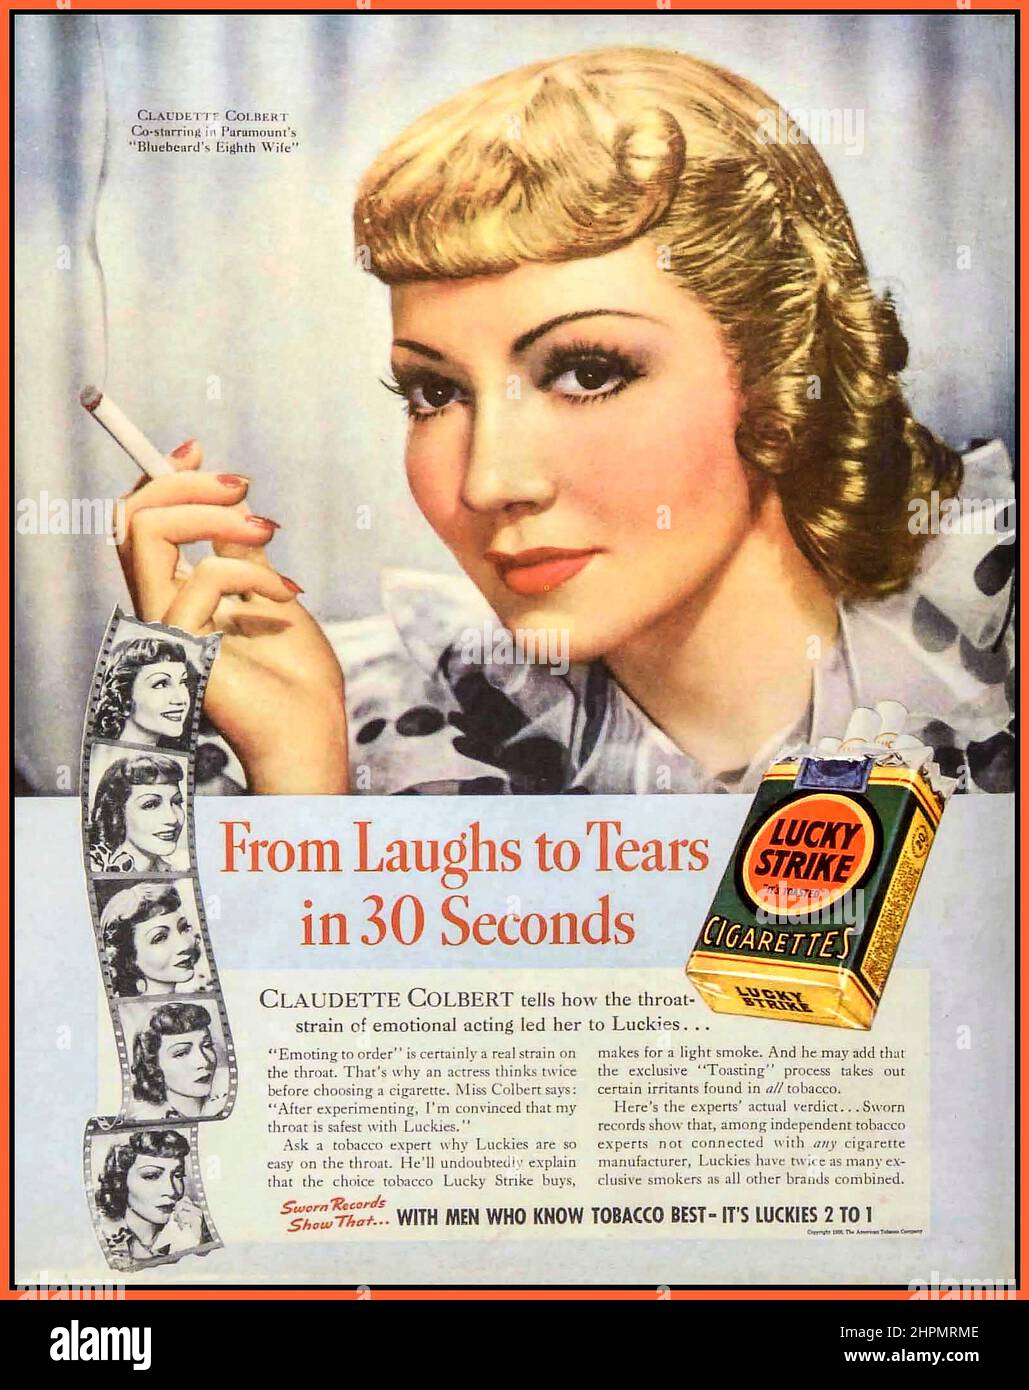 Cigarette Celebrity Endorsment 1938 by  Claudette Colbert for Lucky Strike cigarettes - 1938 Advertising Ads, Vintage Advertisements, Vintage Ads, Vintage Prints, Vintage Images, , Lucky Strike Cigarettes, Vintage Cigarette Ads, Claudette Colbert From Laughs to Tears in 30 Seconds, with men who know tobacco best- it's luckies 2 to 1 Stock Photo